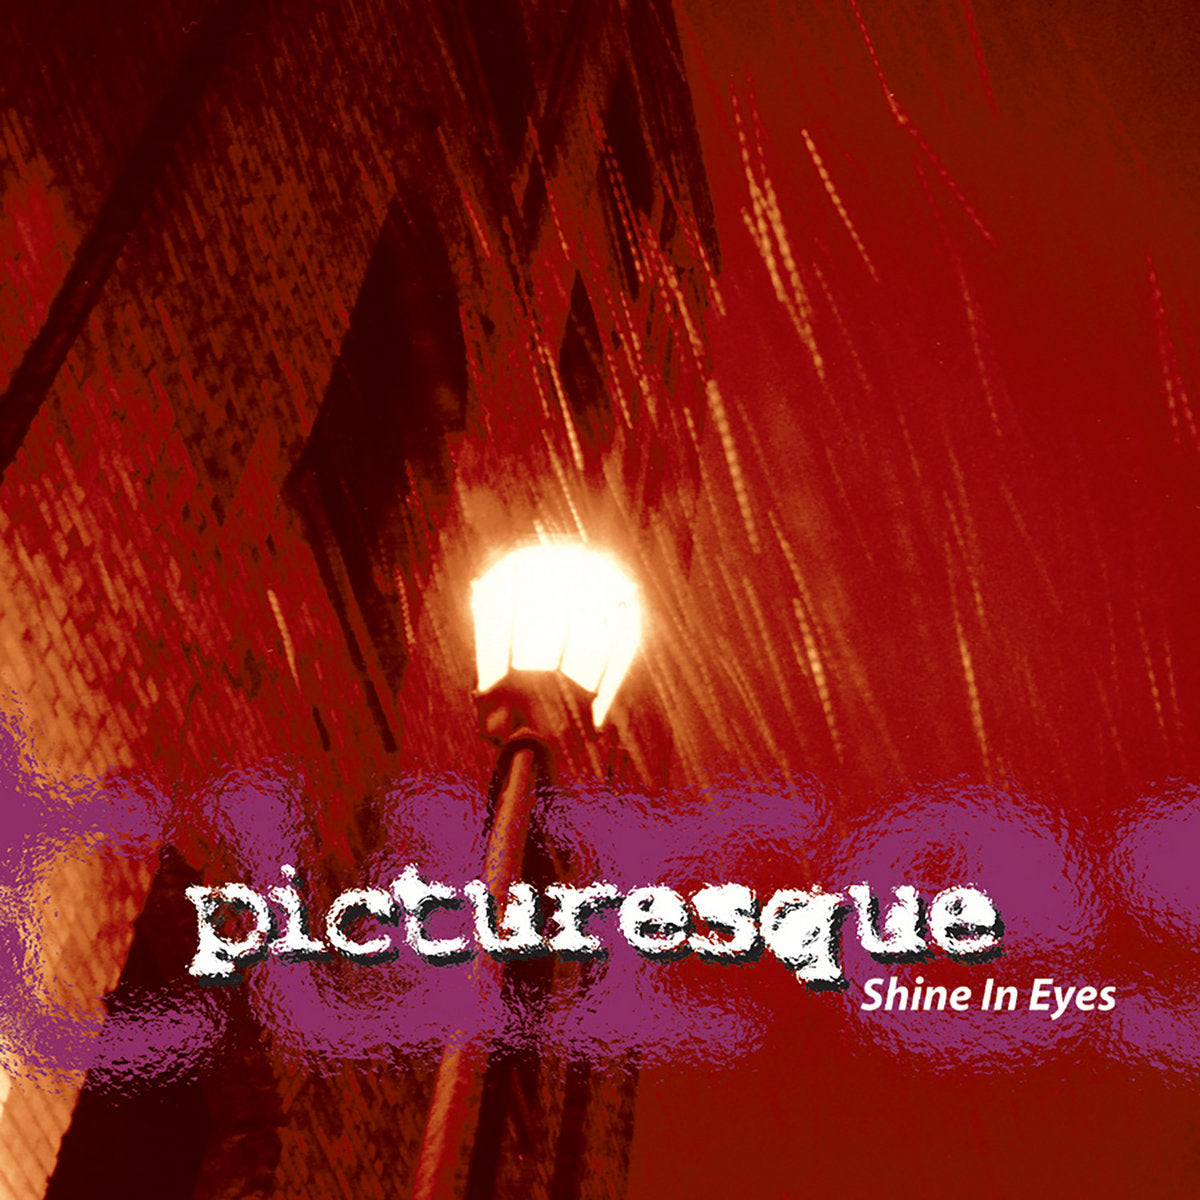 Picturesque "Shine In Eyes" CD